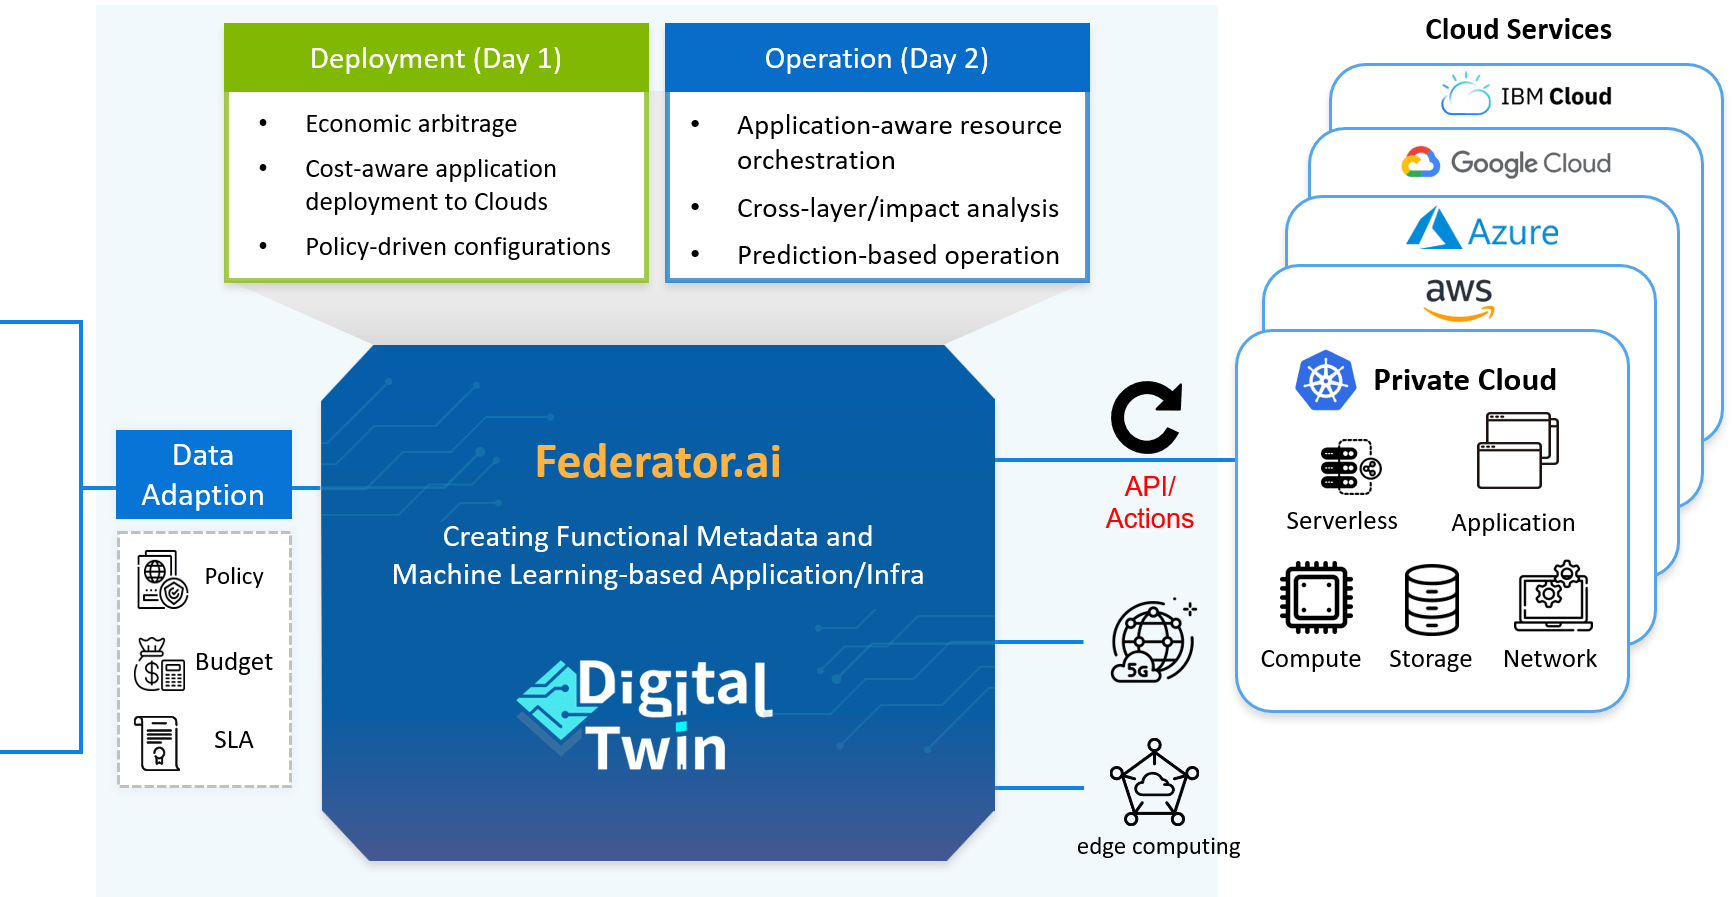 Federator.ai taps into monitoring services like Prometheus and application accelerators like Kafka to optimize costs for Day-1 deployment and Day-2 operations on MultiCloud.